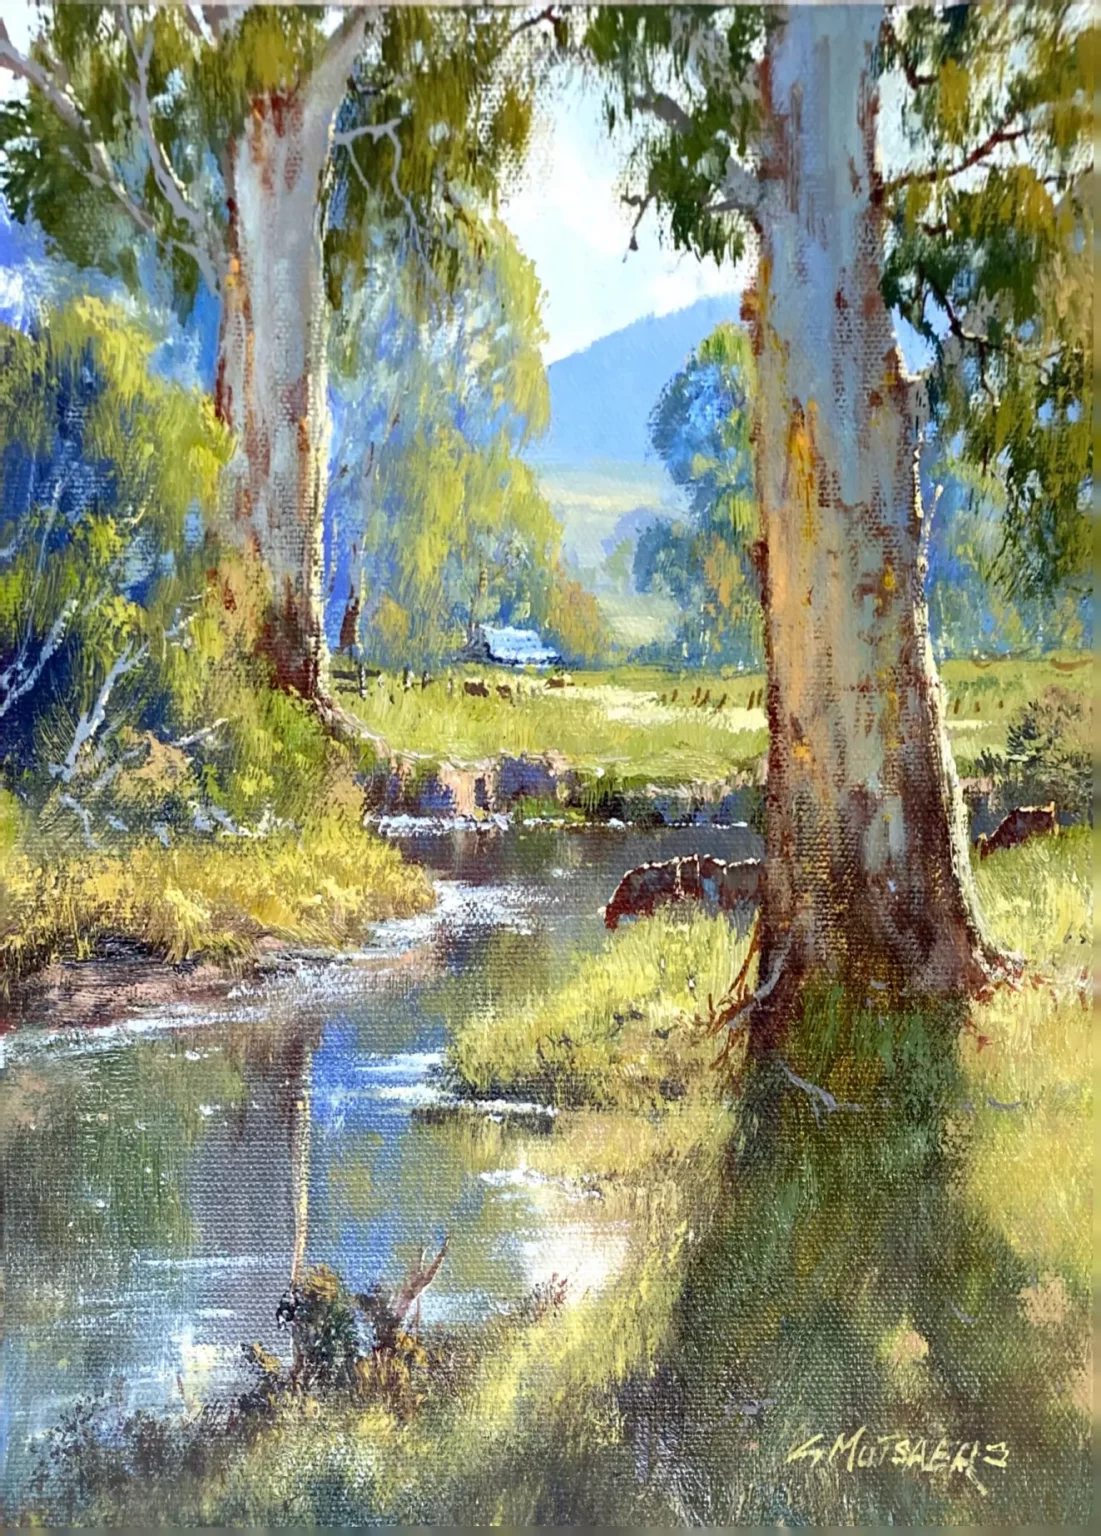 Gerard Mutsaers' "Peaceful Valley" Oil on Canvas Board artwork for sale